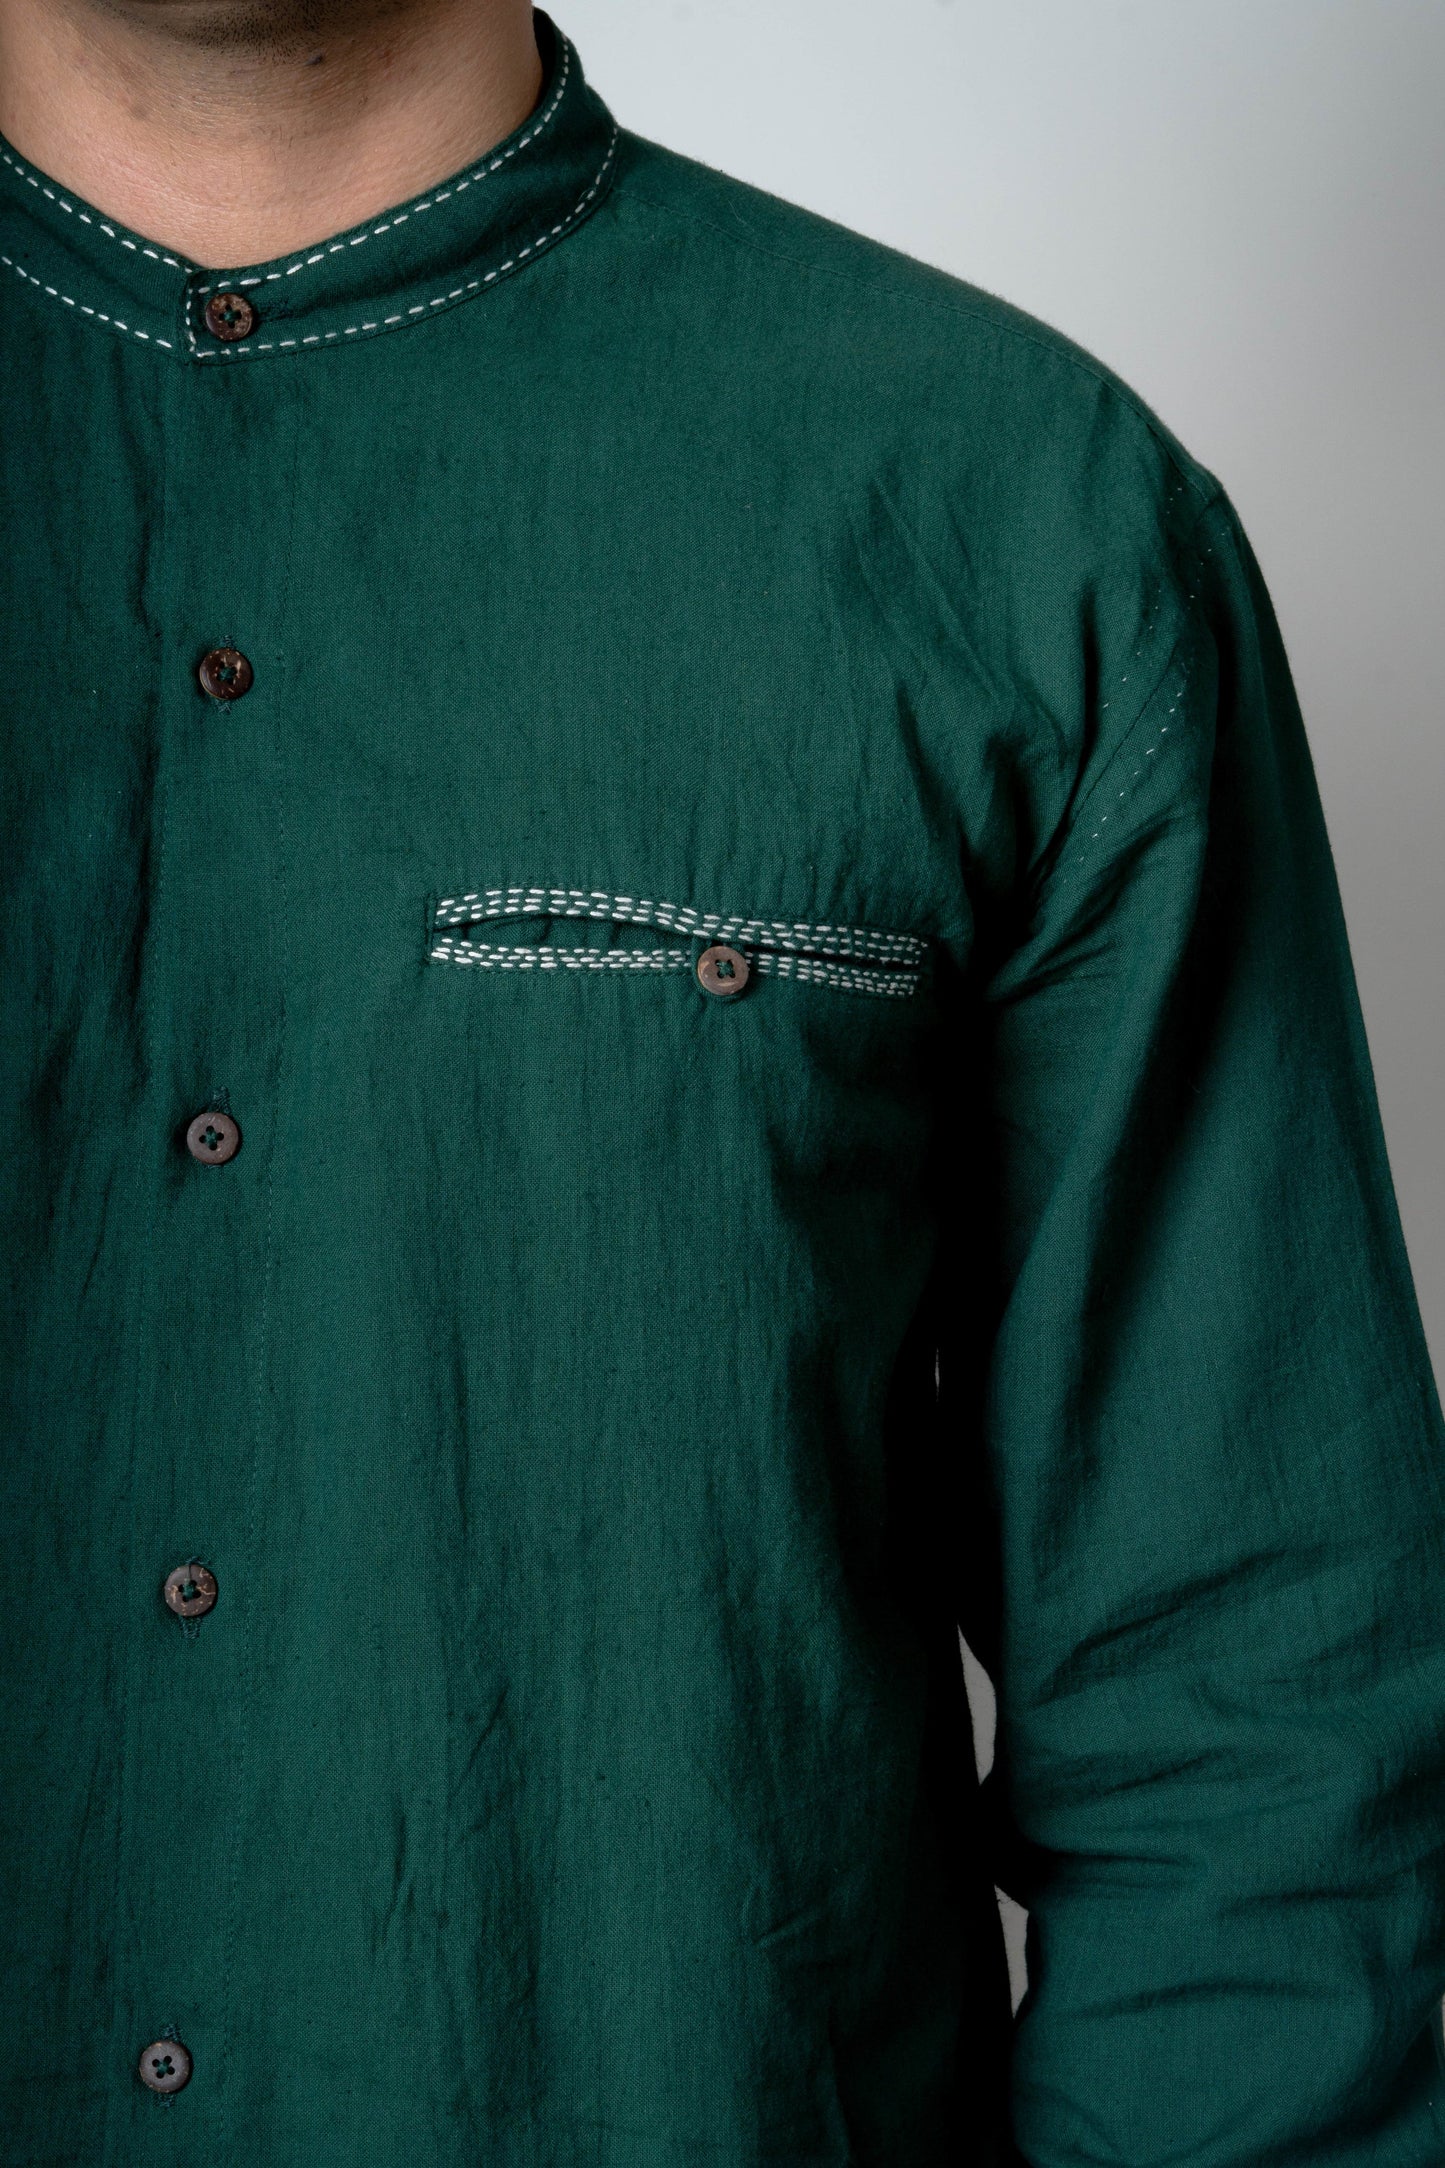 Green Cotton Shirt at Kamakhyaa by Lafaani. This item is Casual Wear, Cotton, For Him, Green, Menswear, Natural, Regular Fit, Shirts, Solids, Tops